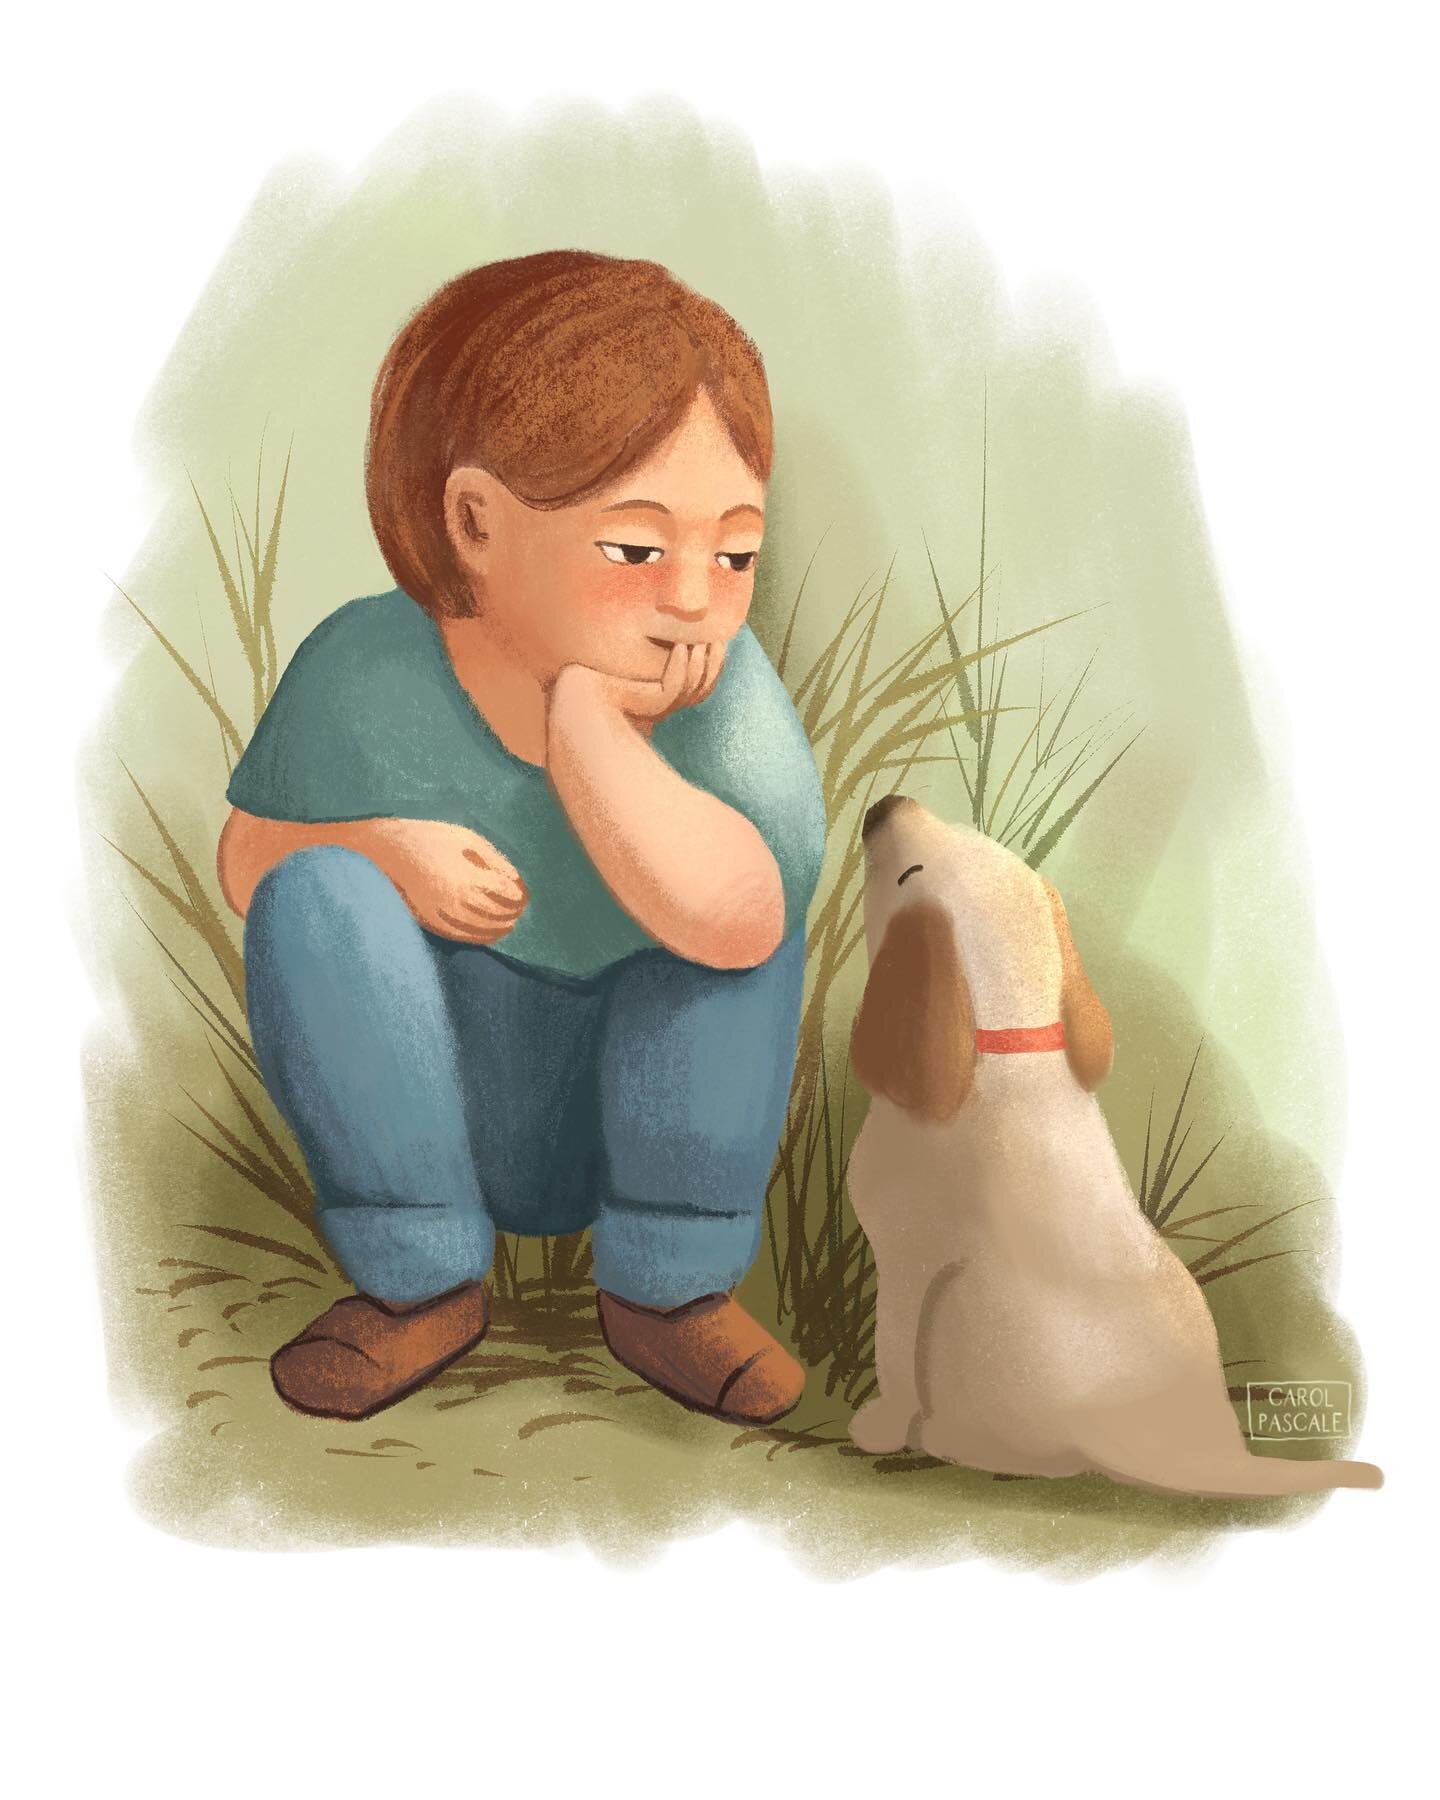 Boy and dog 🐕
.
.
.
#characterdesign #characterillustration #characterdesigner #childrensillustrators #childrensillustration #childrensillustrations
#childrensbookillustrator #childrensbookillustration #kidlit #kidlitart #illustration #illustrator #